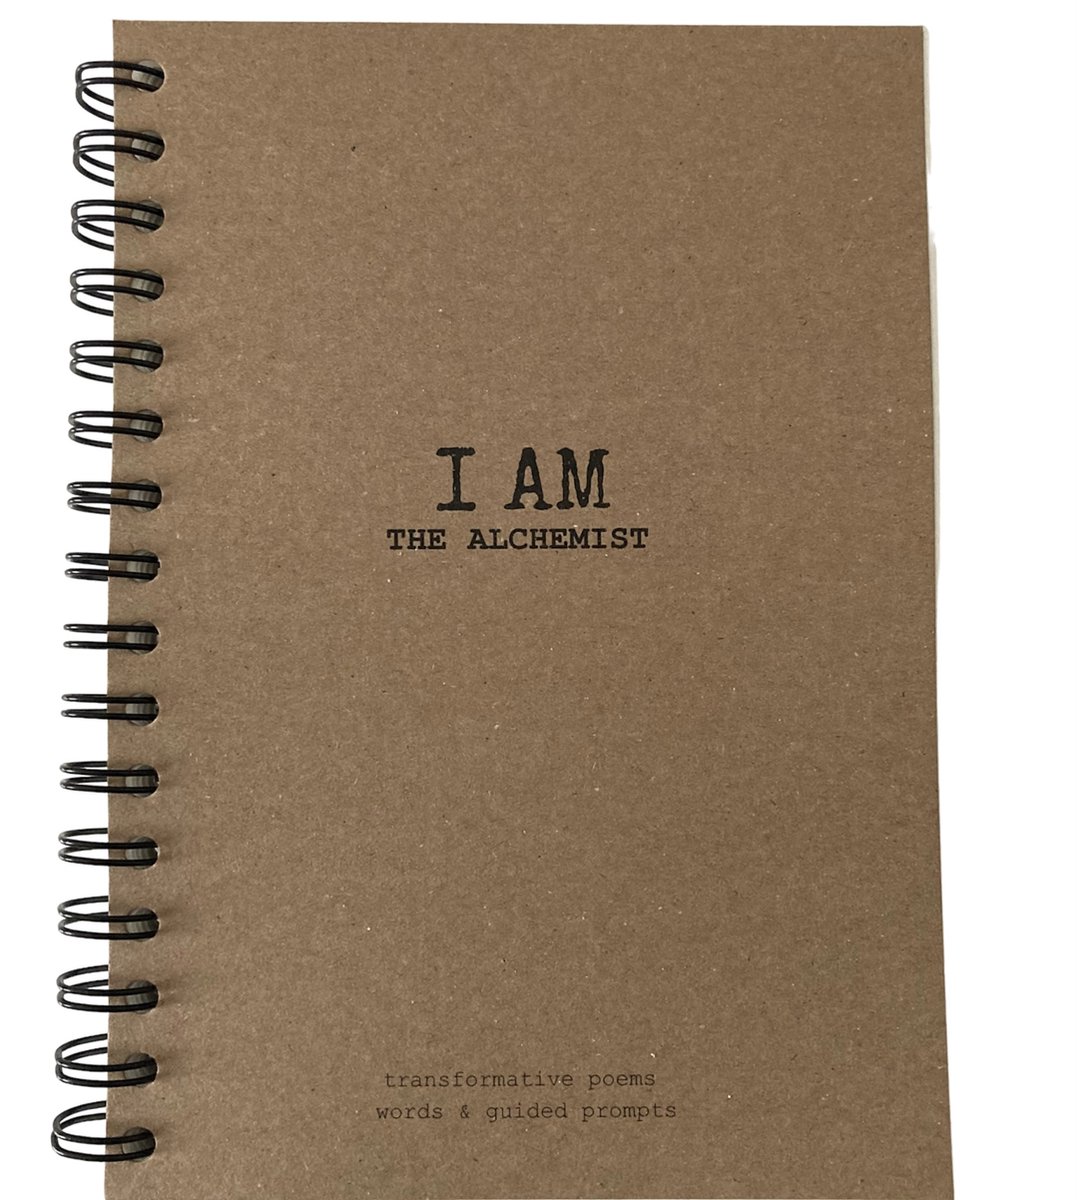 I AM the alchemist - the journal - transformatiejournal - poems - prompts - quotes